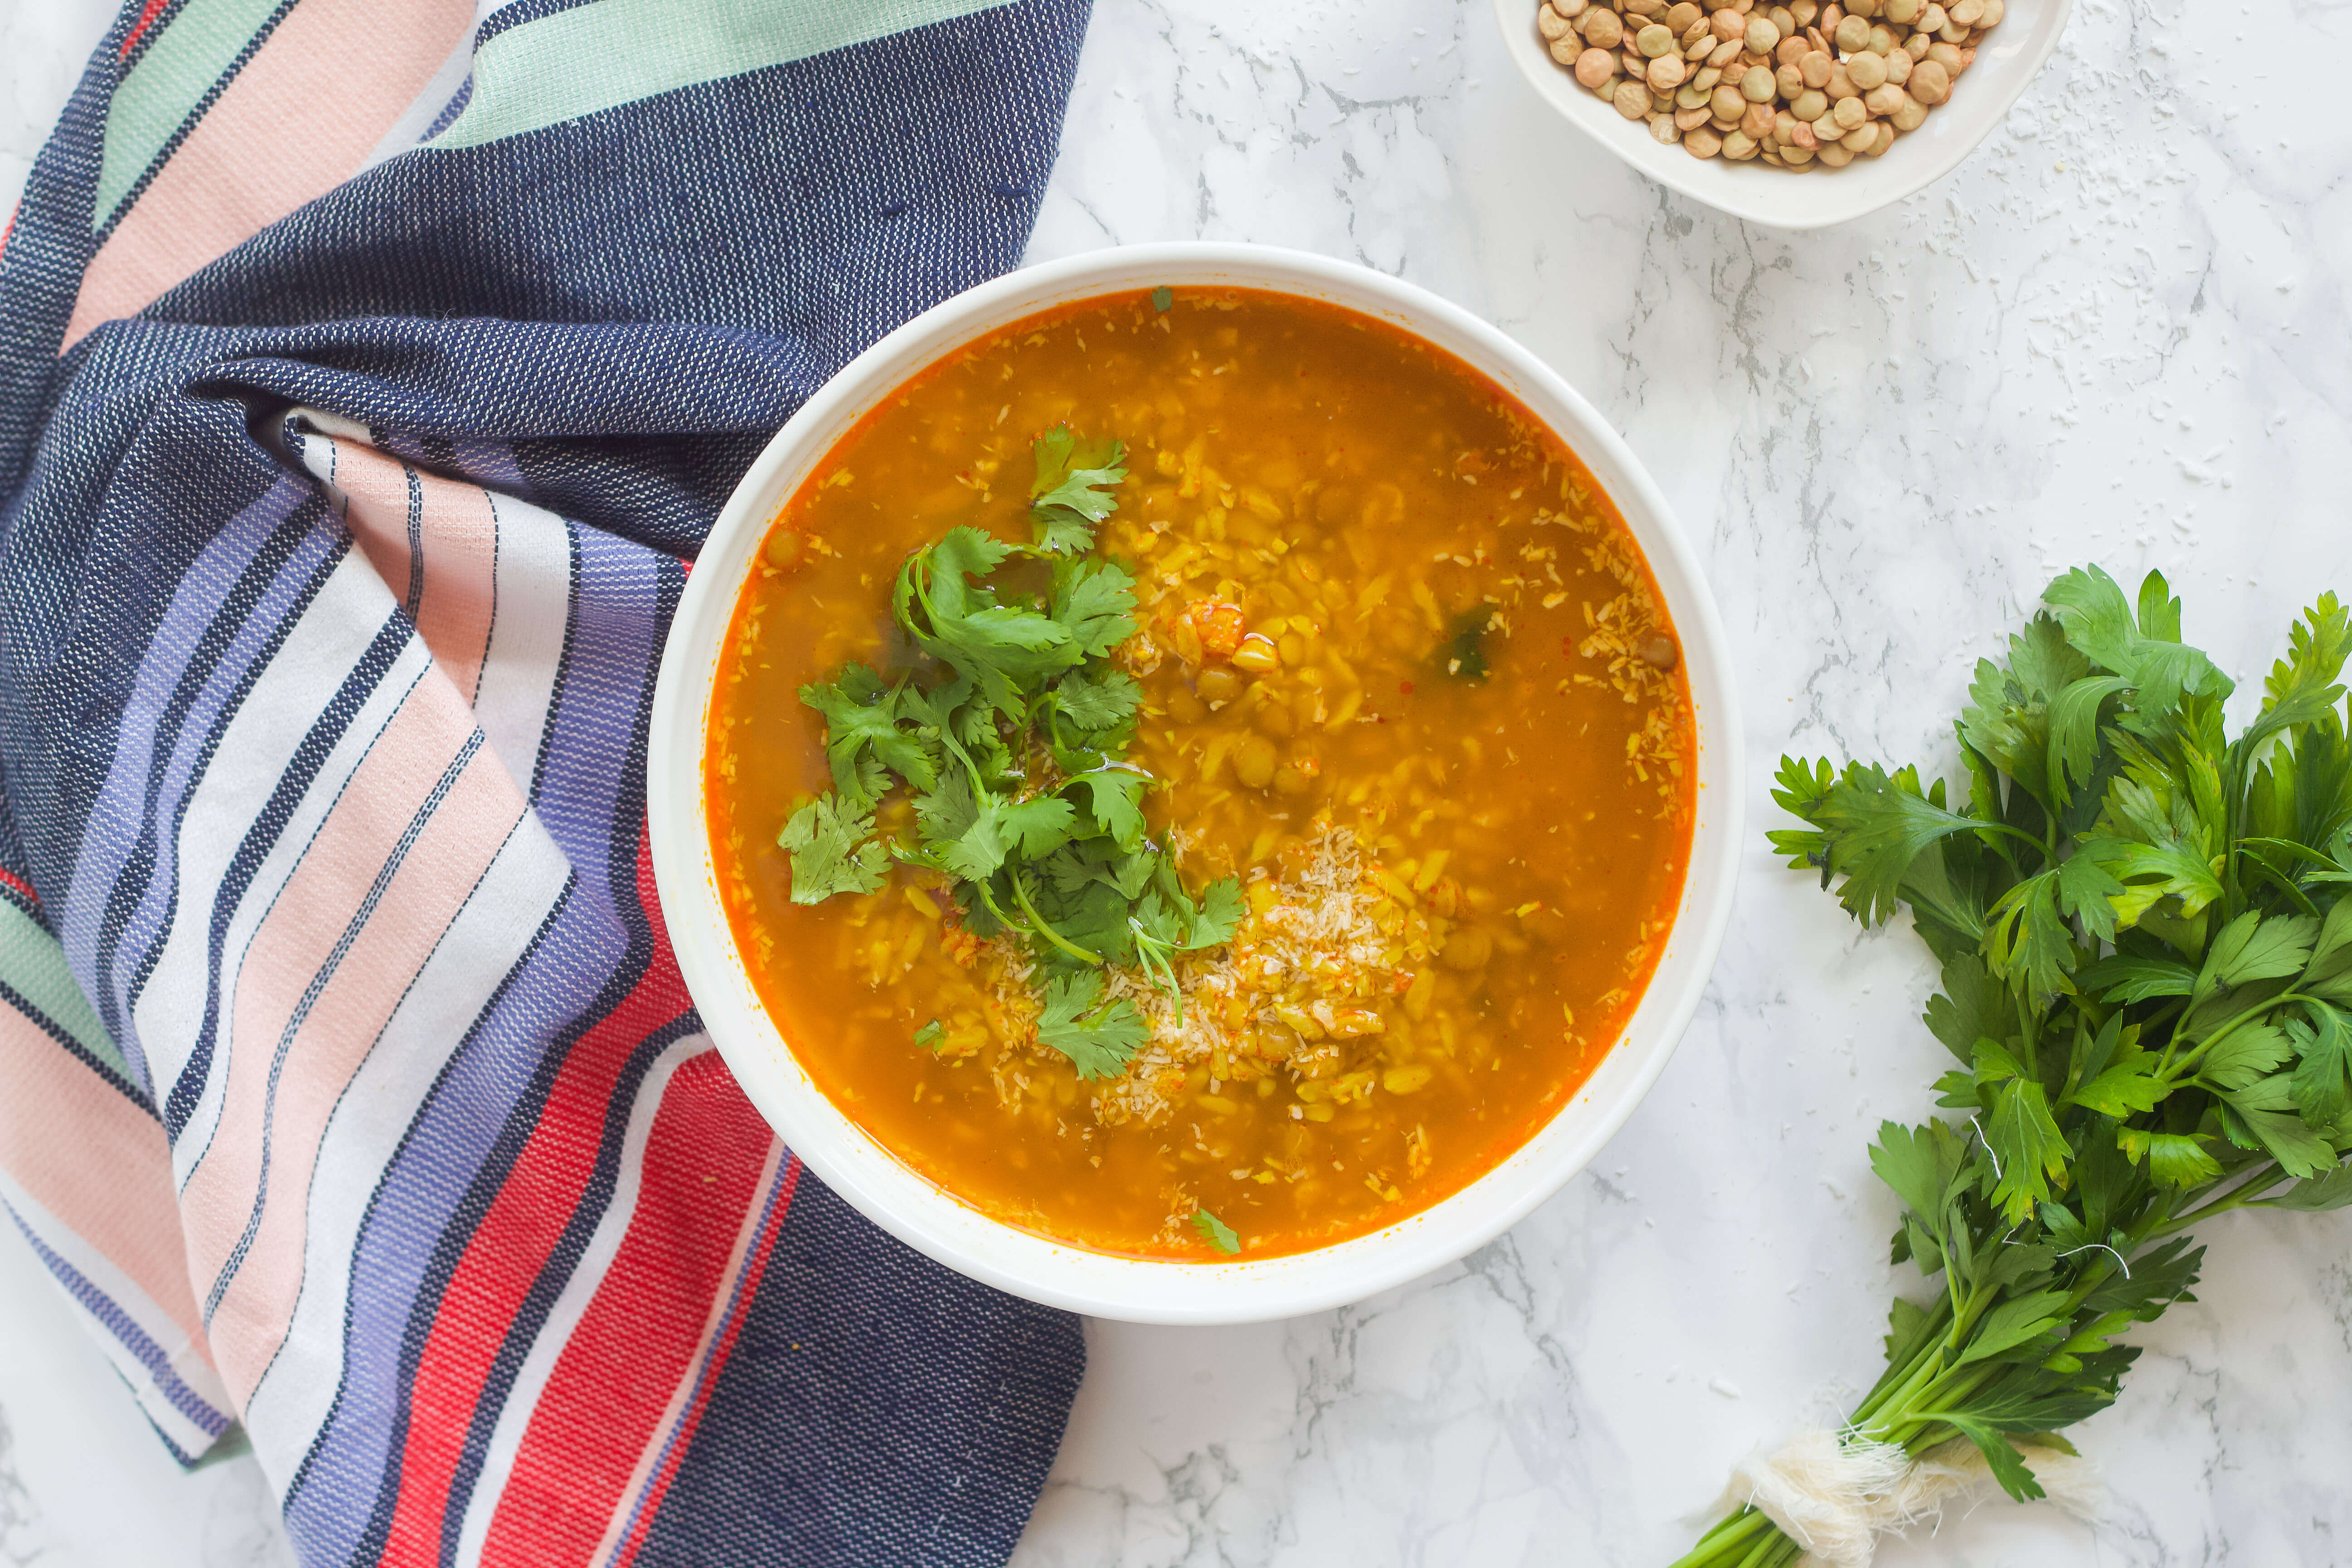 Healthy $4 Dinners to Add to Your Client's Meal Plan: Spicy Coconut Lentil Soup